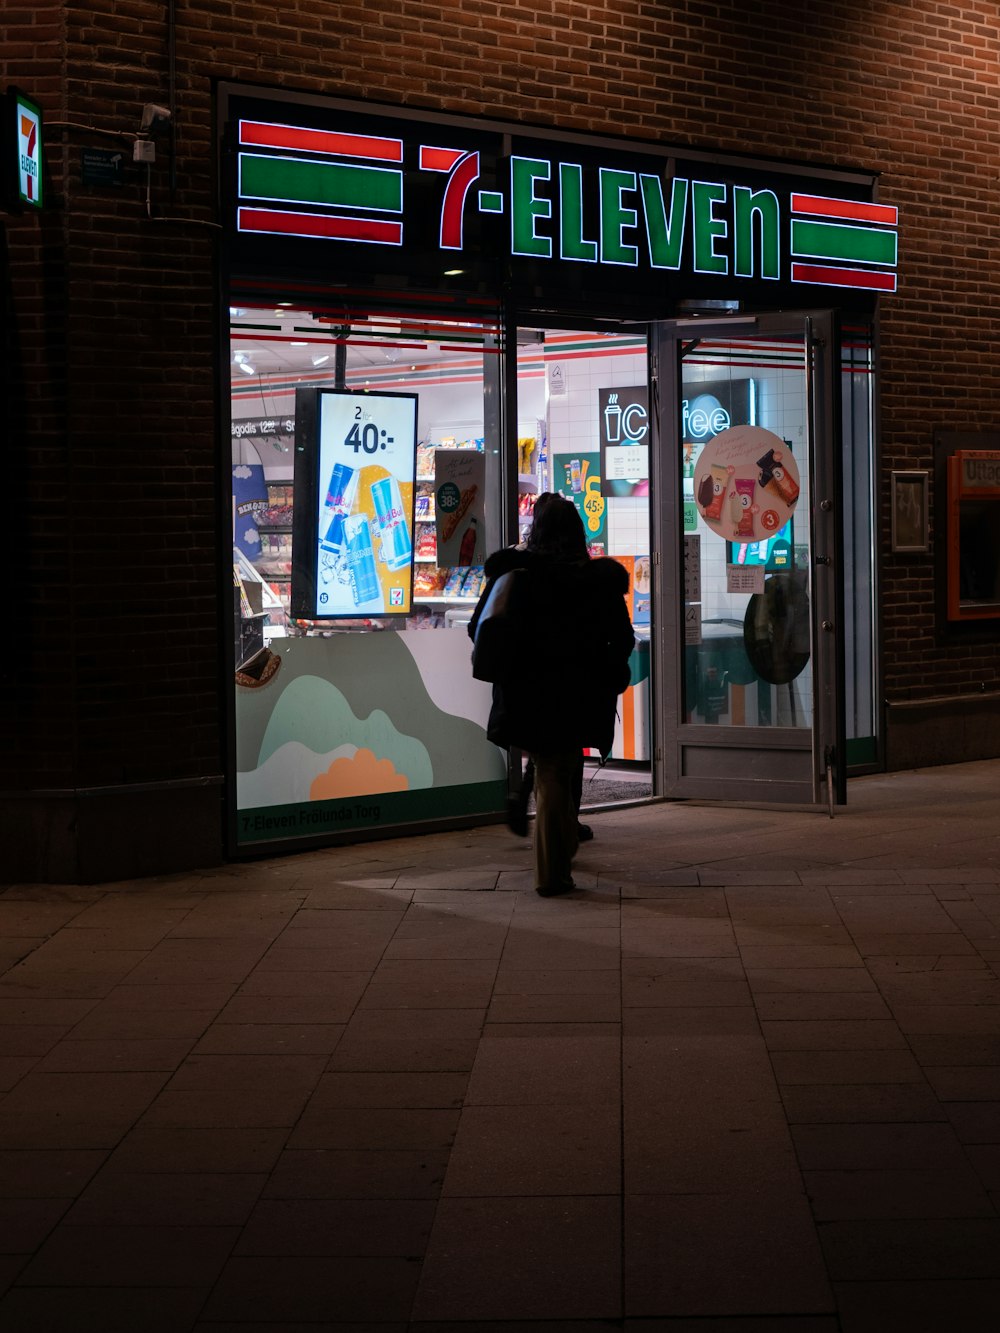 a person walking out of a store at night